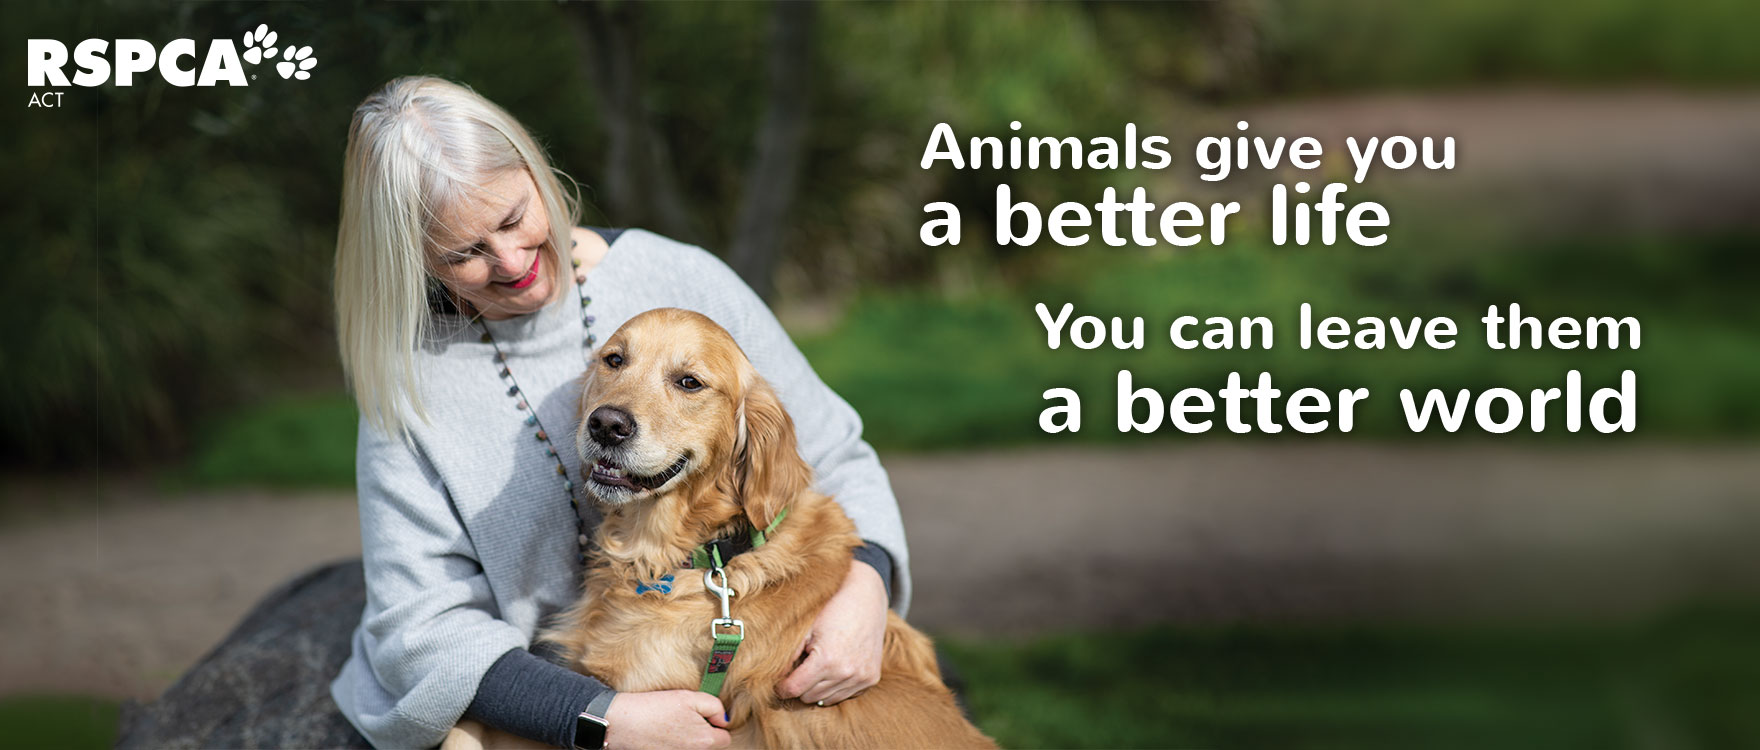 Animals give you a better life, you can leave them a better world